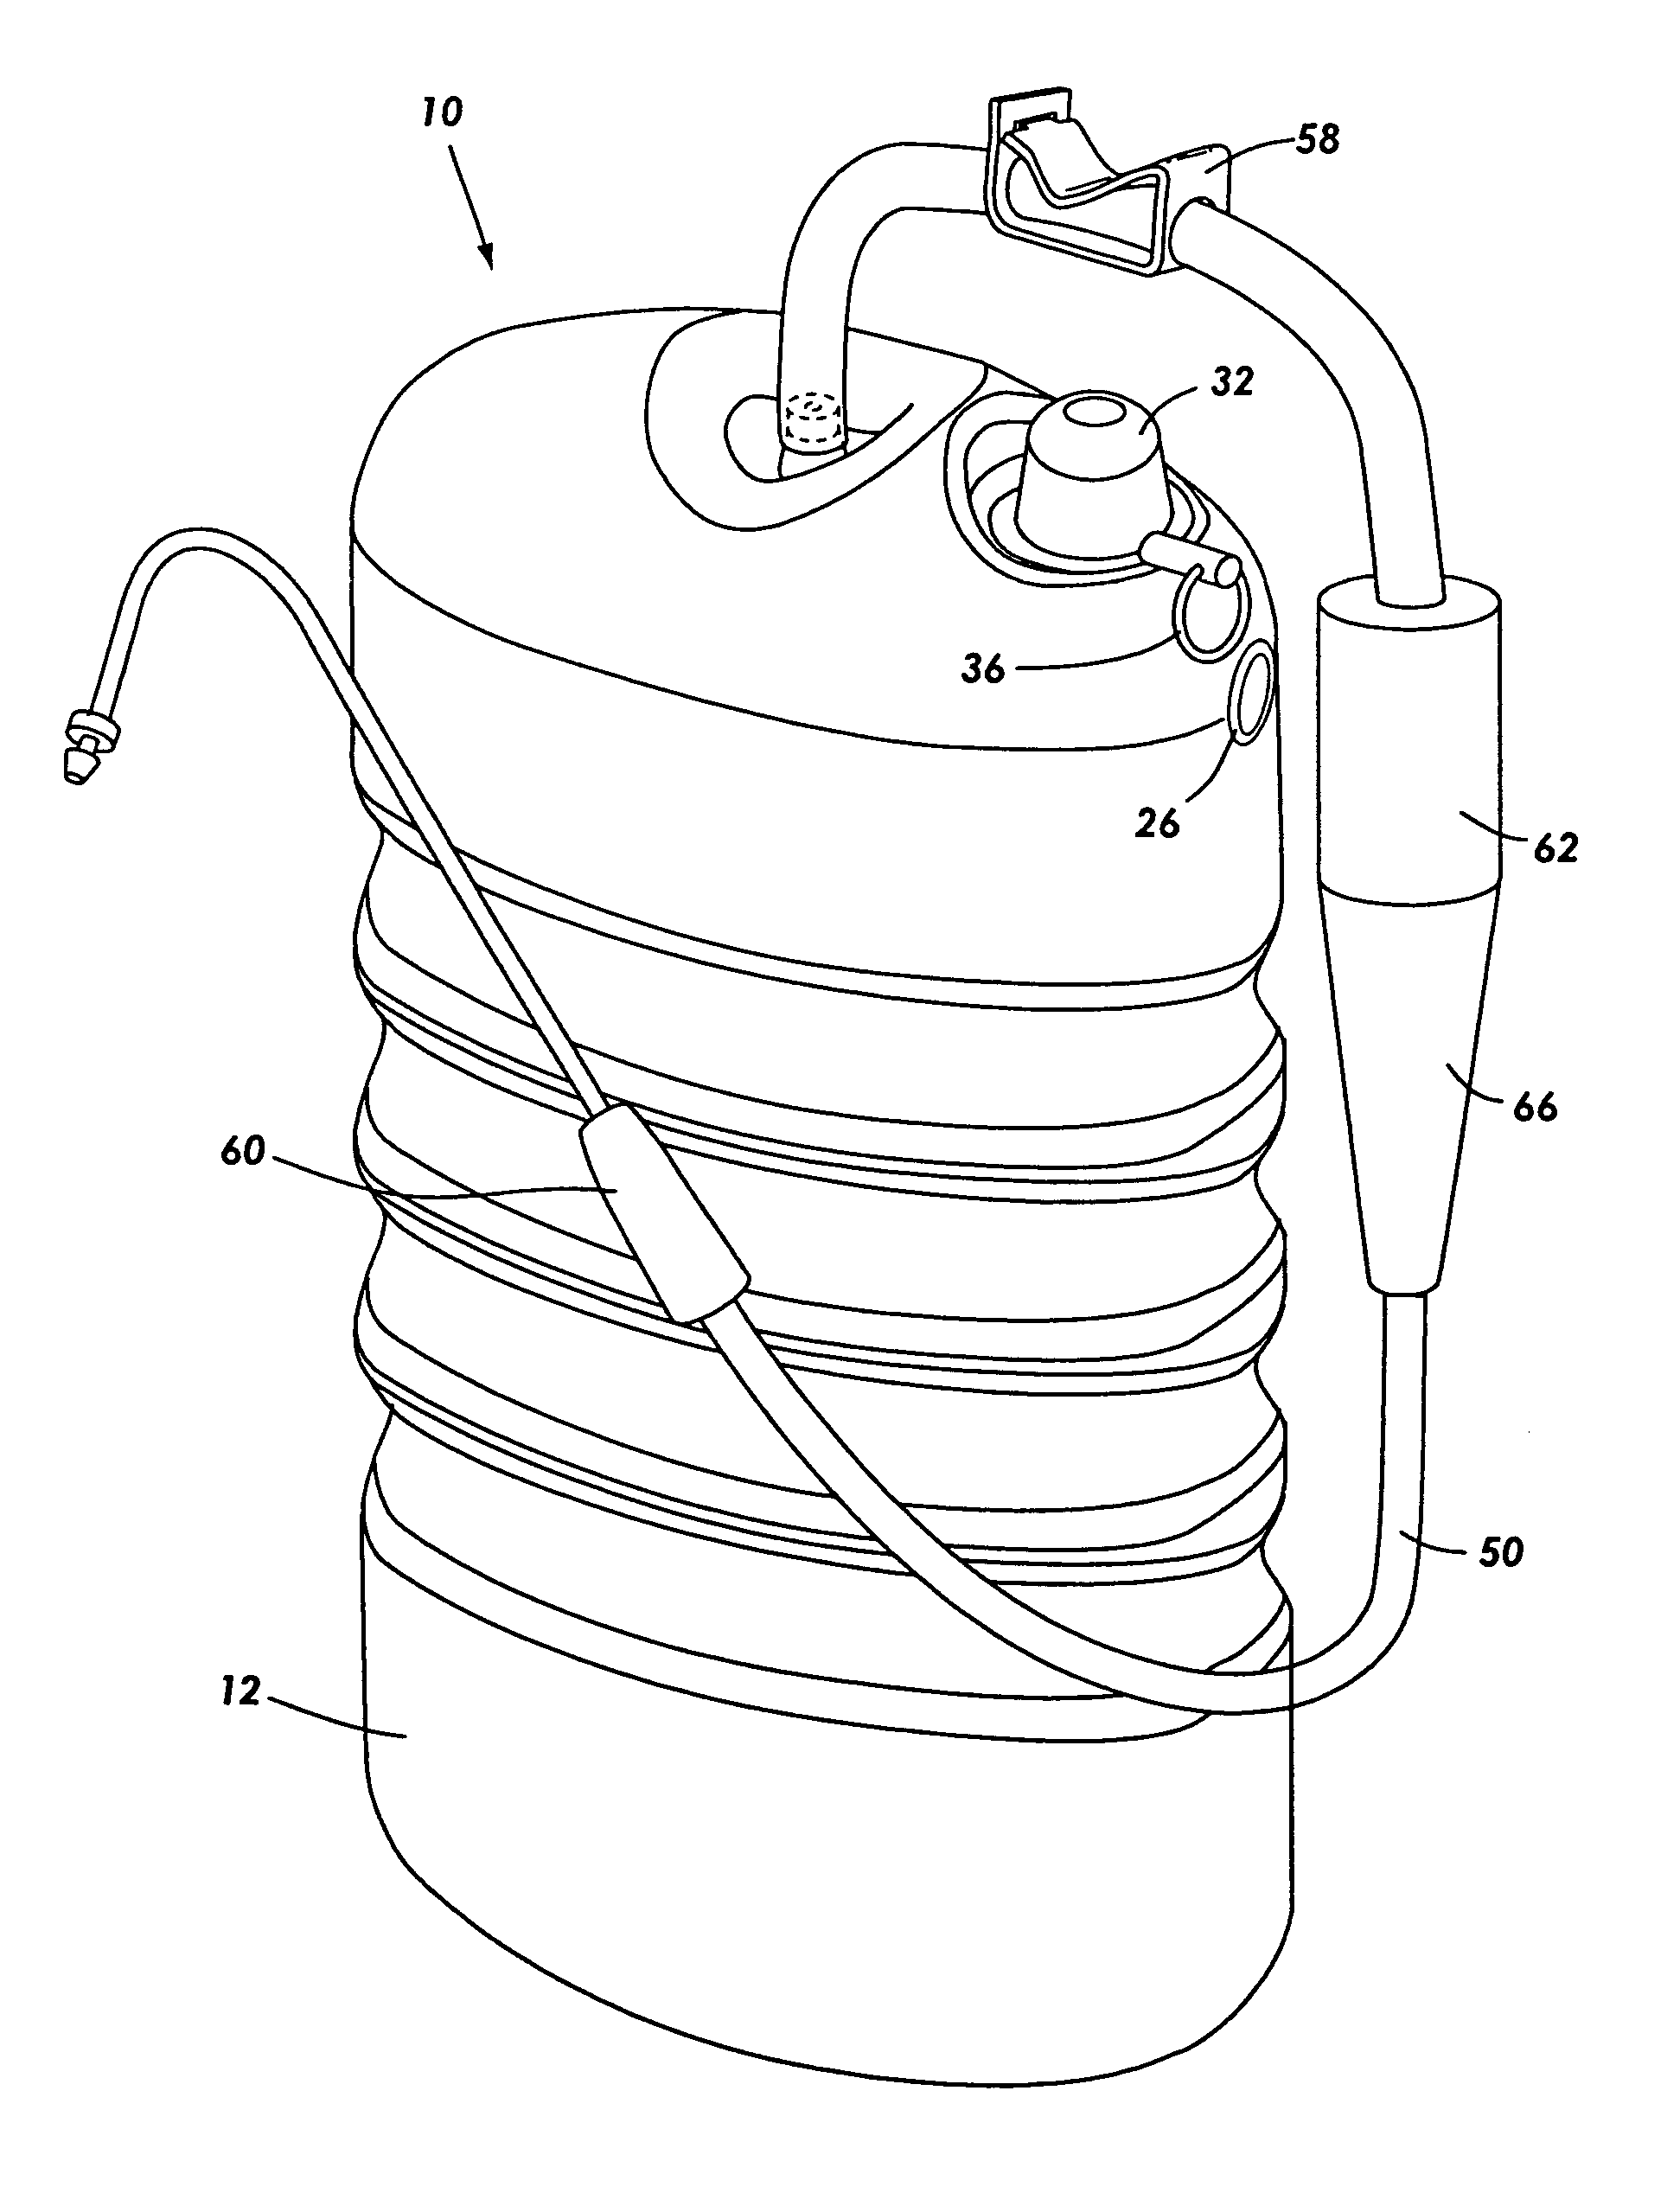 Instant chemical based flexible oxygen in a non-pressurized flexible or rigid containment system